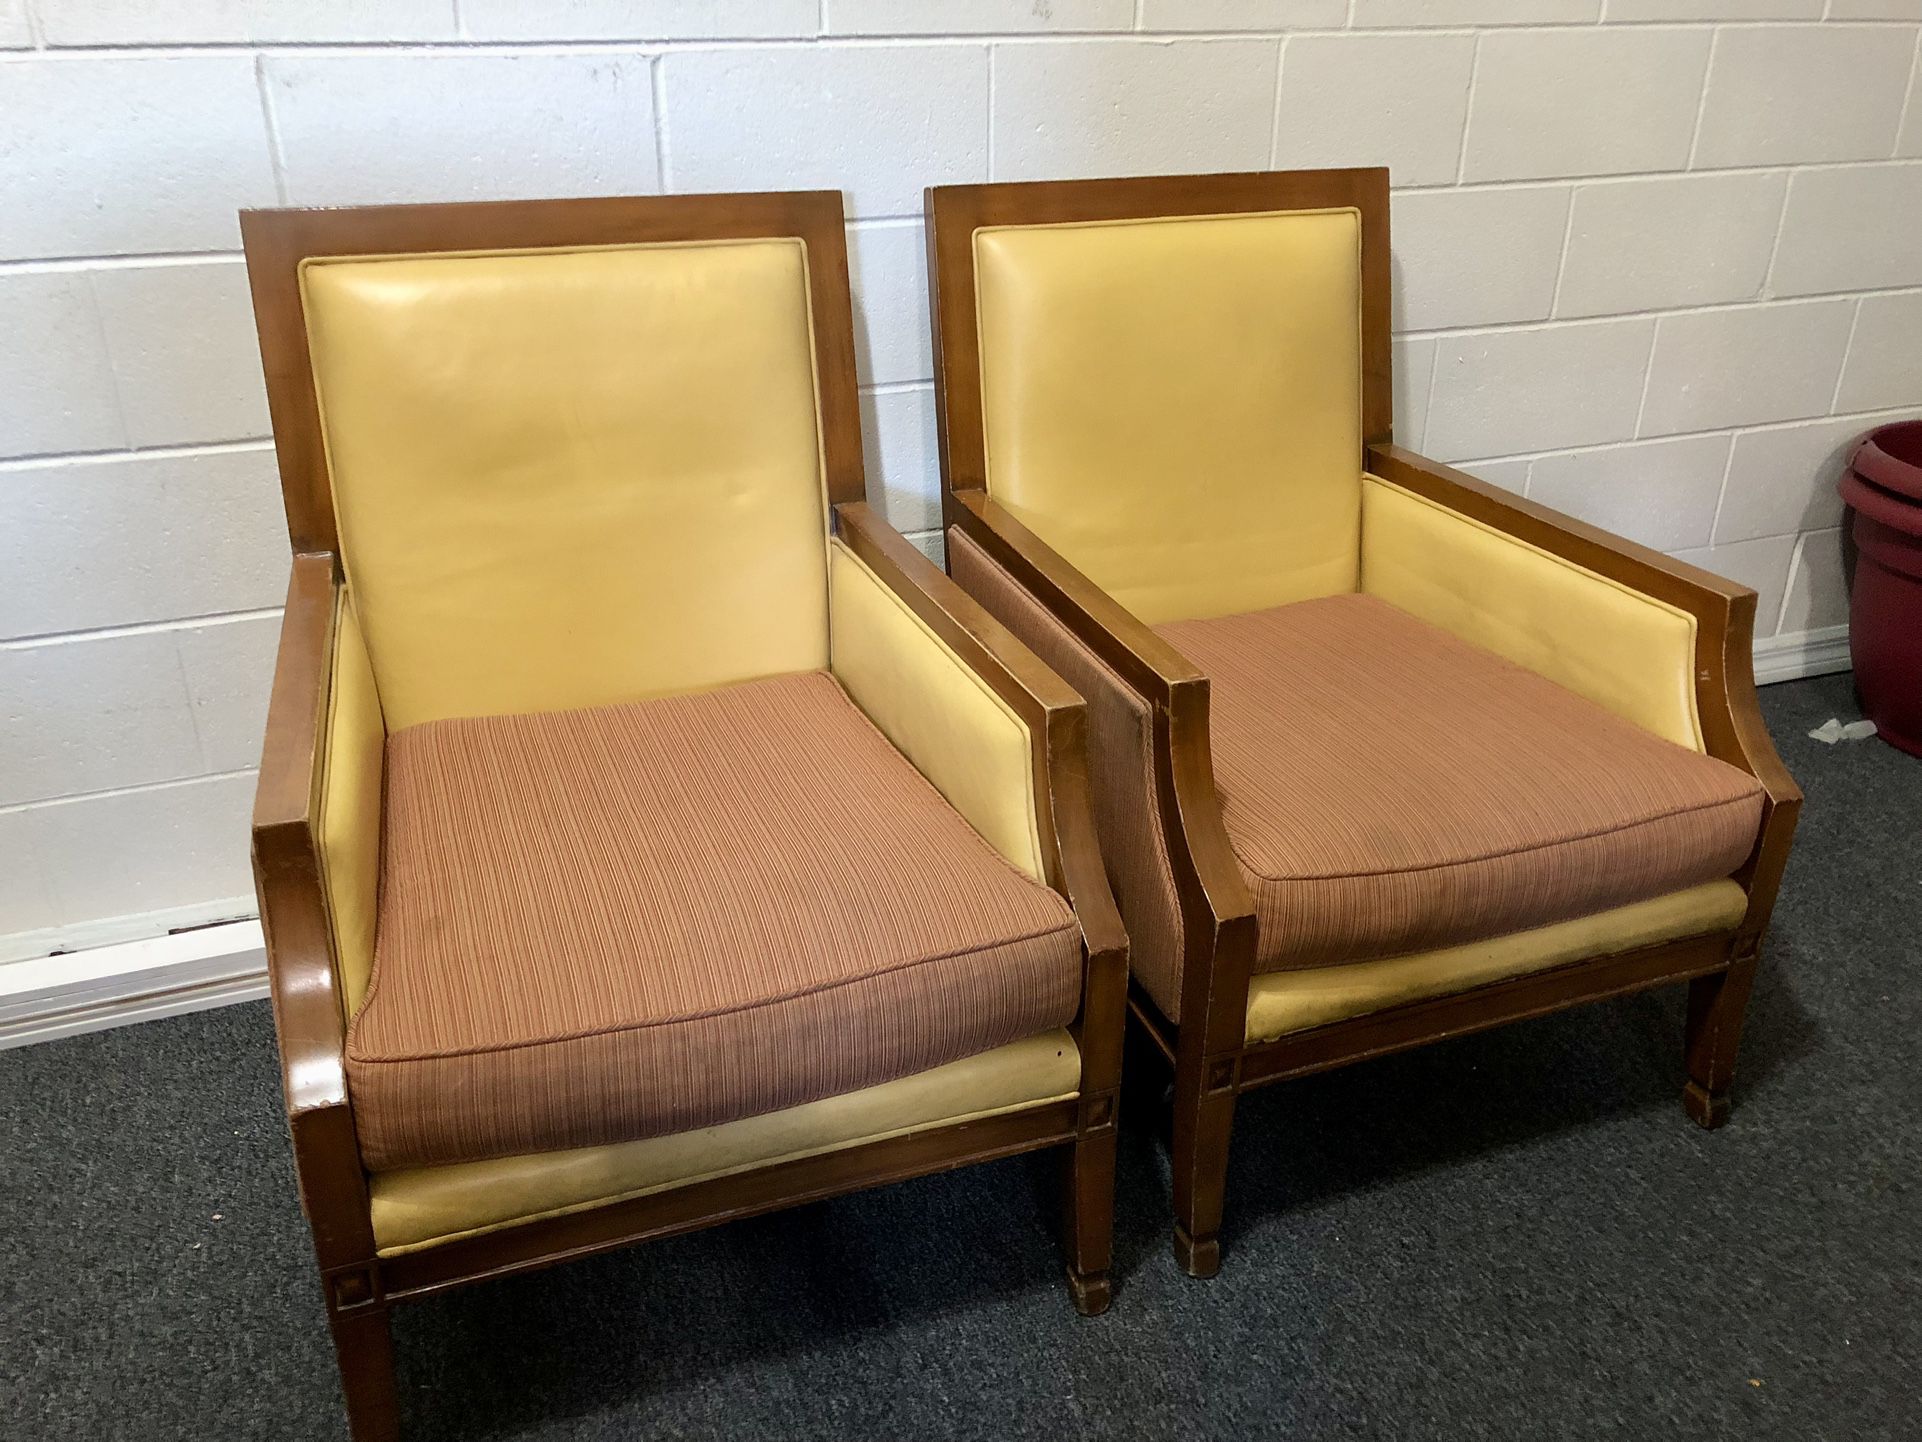 Pair of Vintage Mid Century Modern Arm Chairs/Accent Chairs